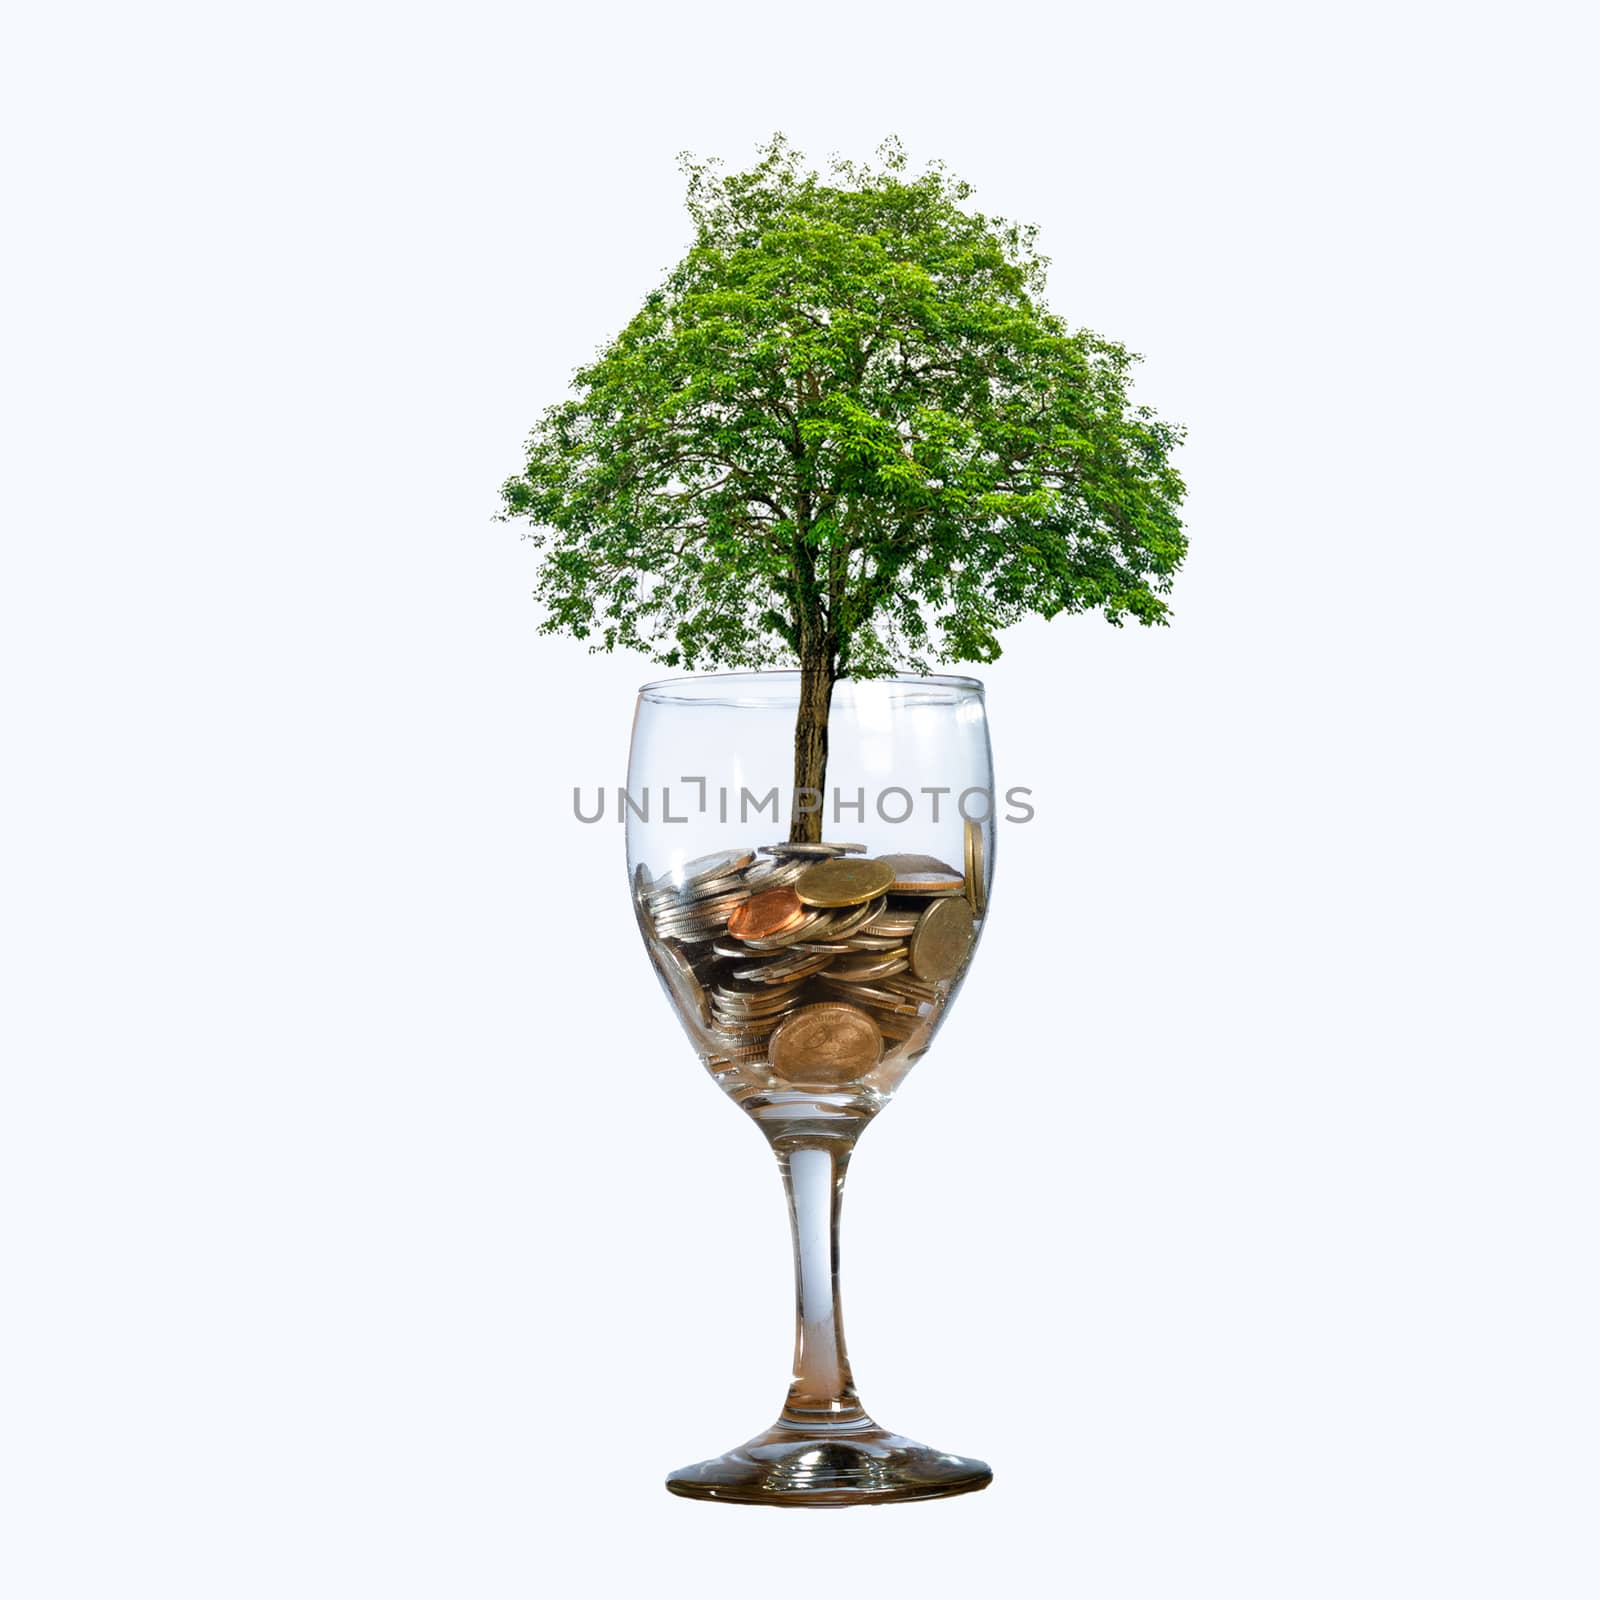 tree Coin glass Isolate hand Coin tree The tree grows on the pile. Saving money for the future. Investment Ideas and Business Growth